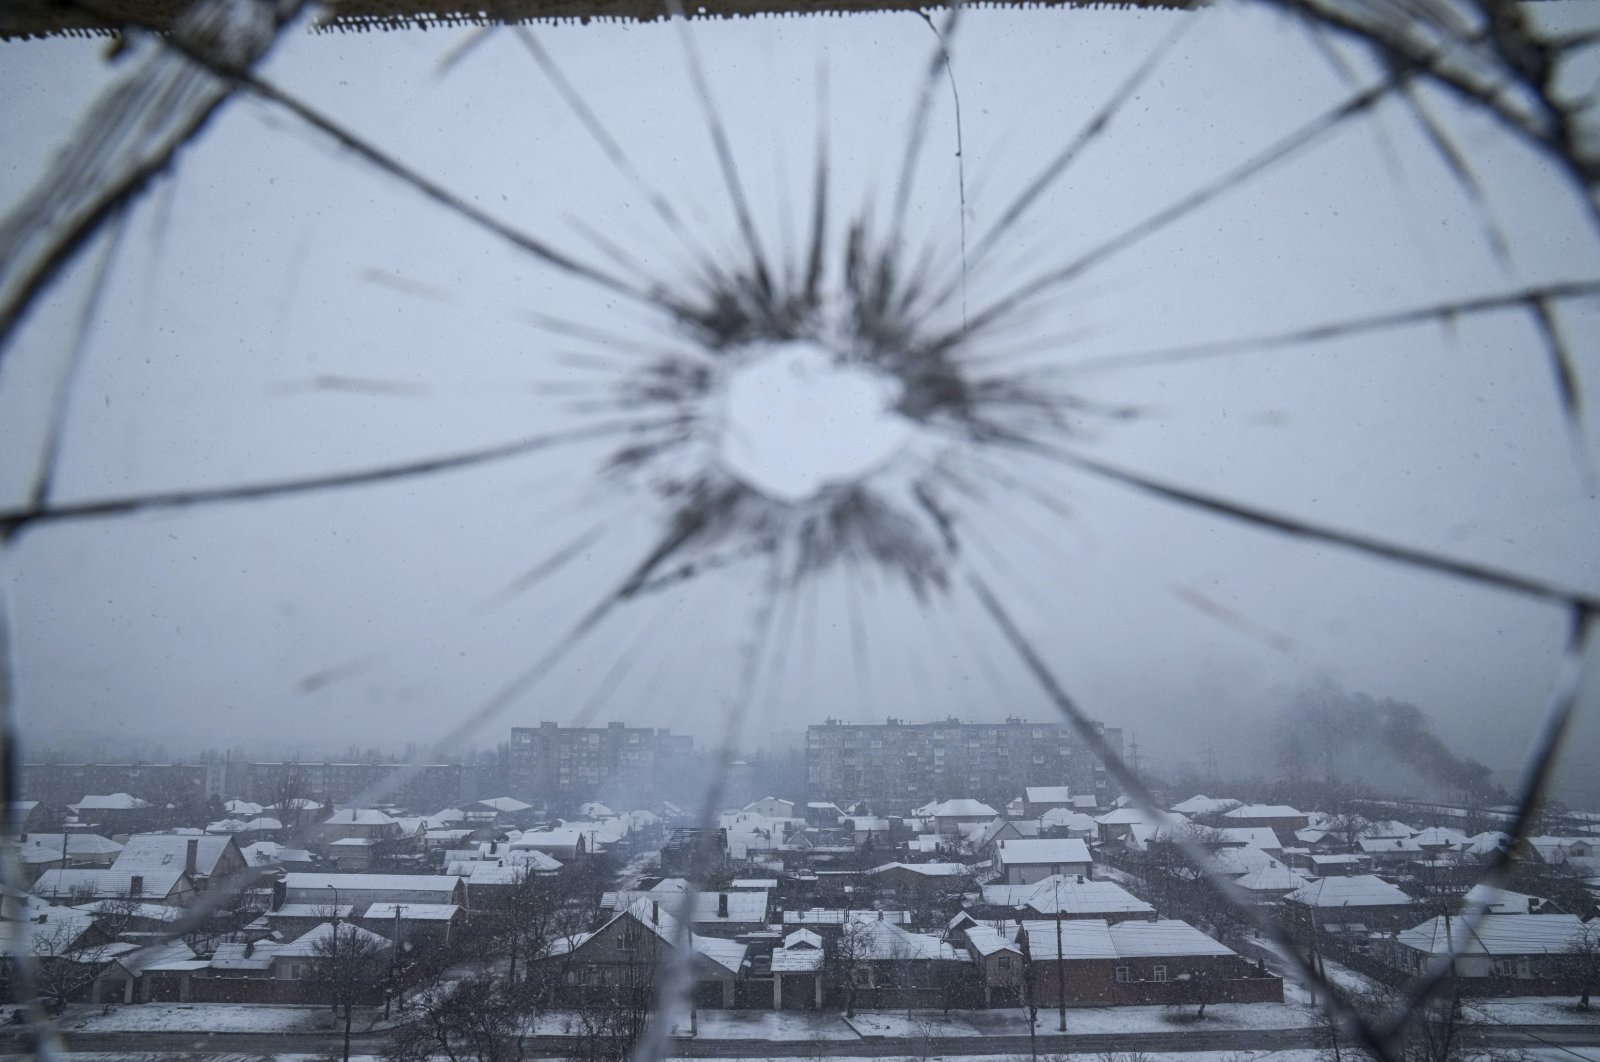 A view from a hospital window broken by shelling in Mariupol, Ukraine, March 3, 2022. (AP Photo)